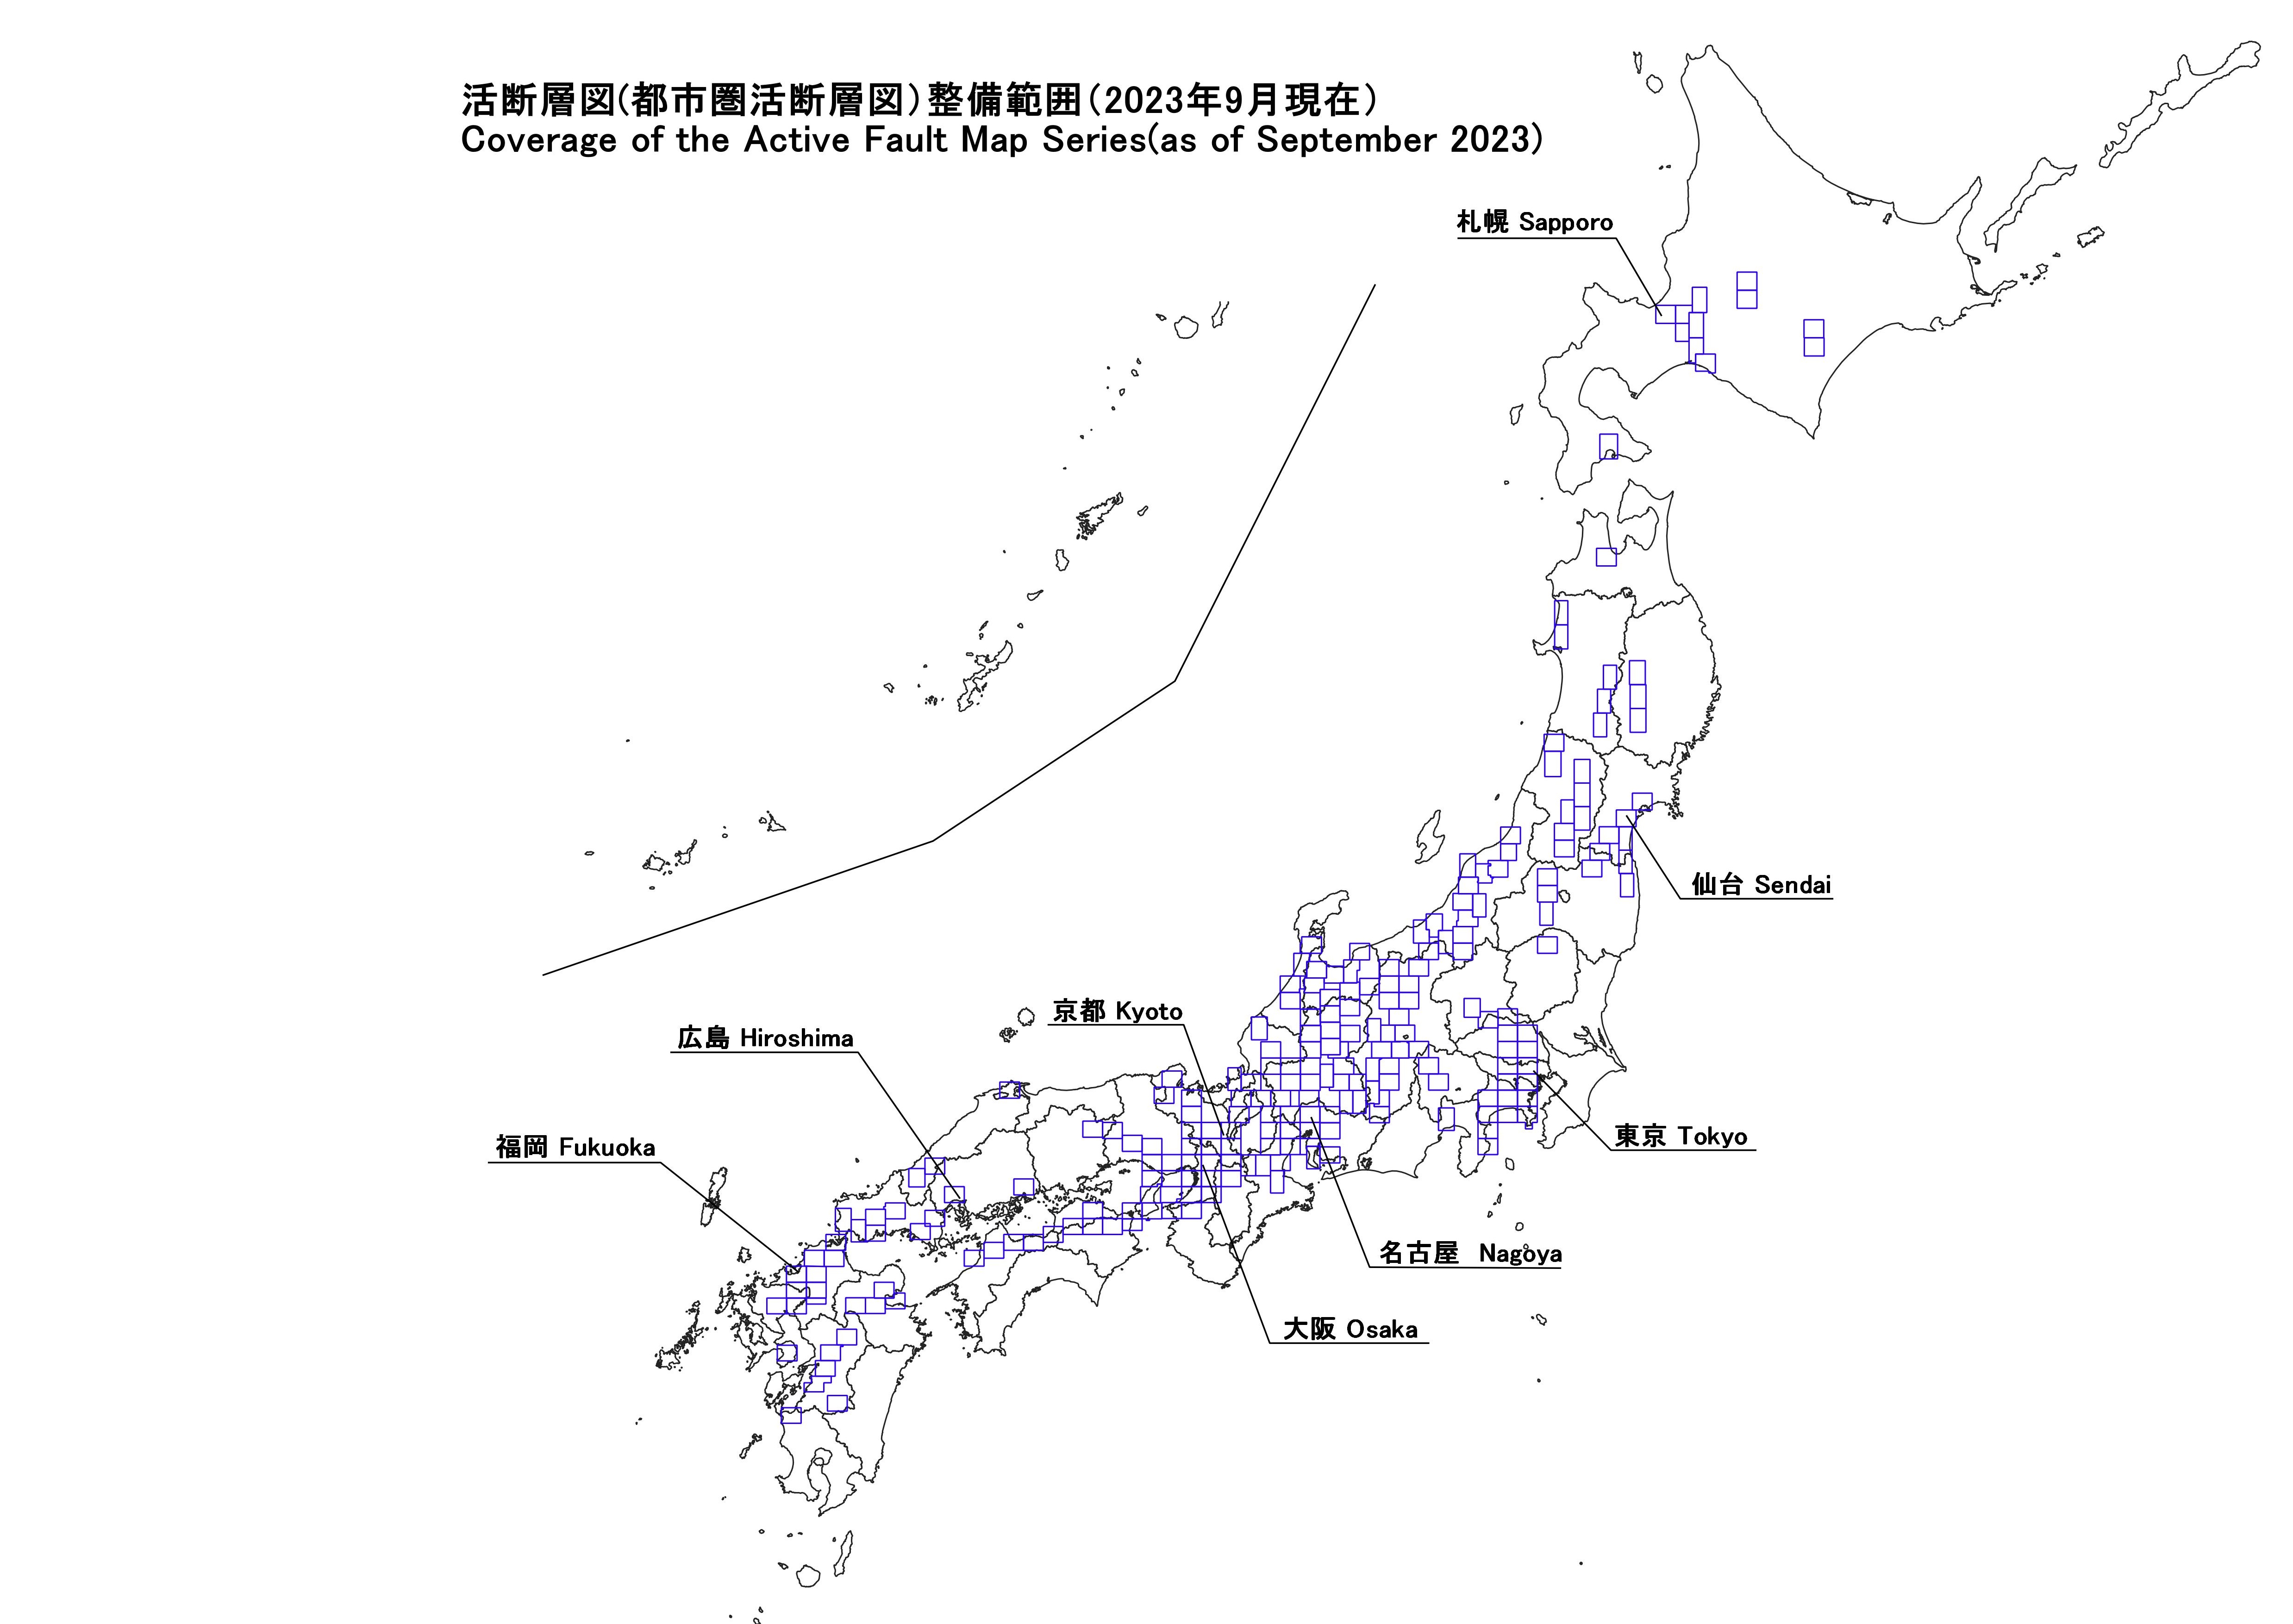 image:State of Development of Active Fault Map